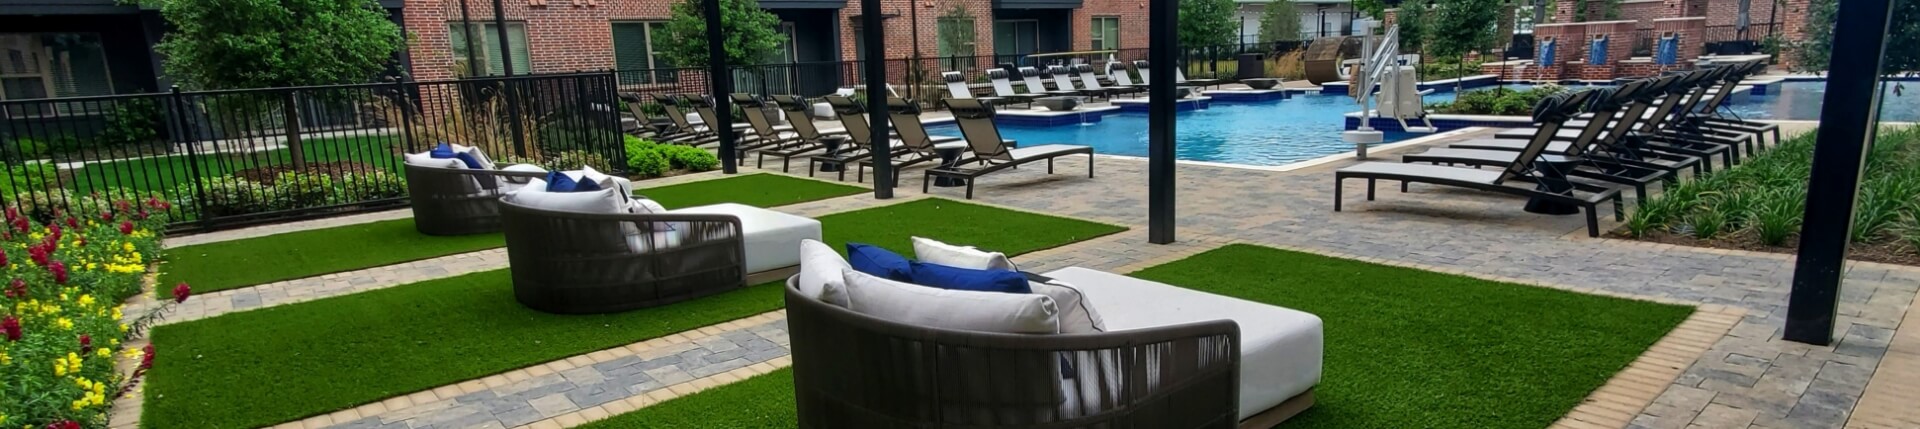 Synthetic grass lawn installed at a hotel